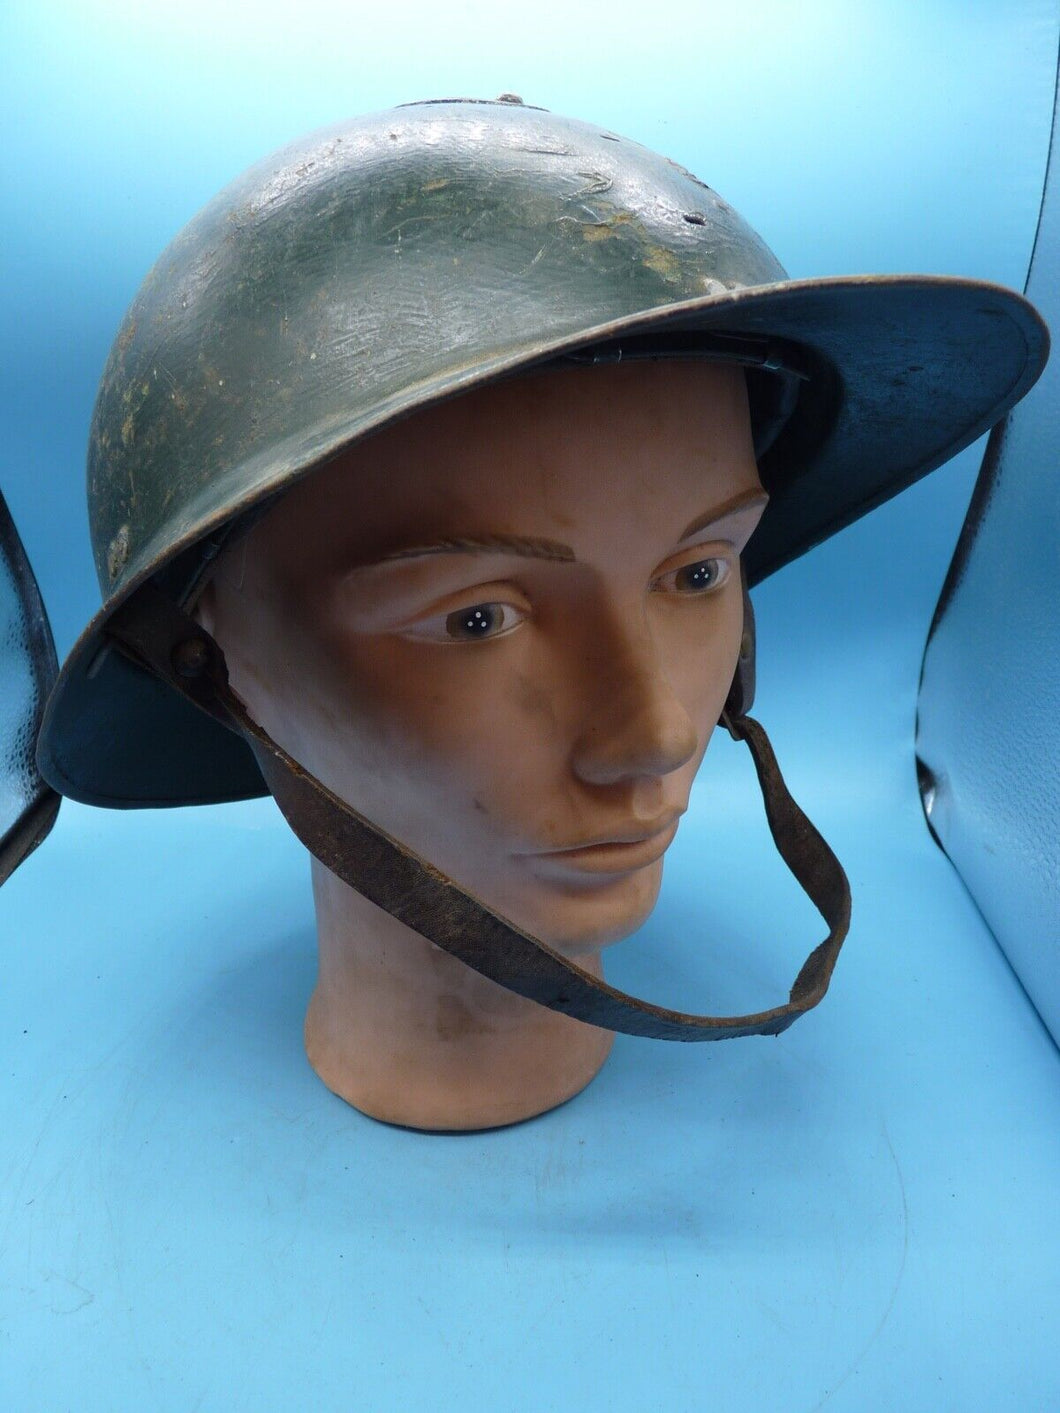 Original WW2 French Army M26 Adrian Helmet Shell - Complete with Liner